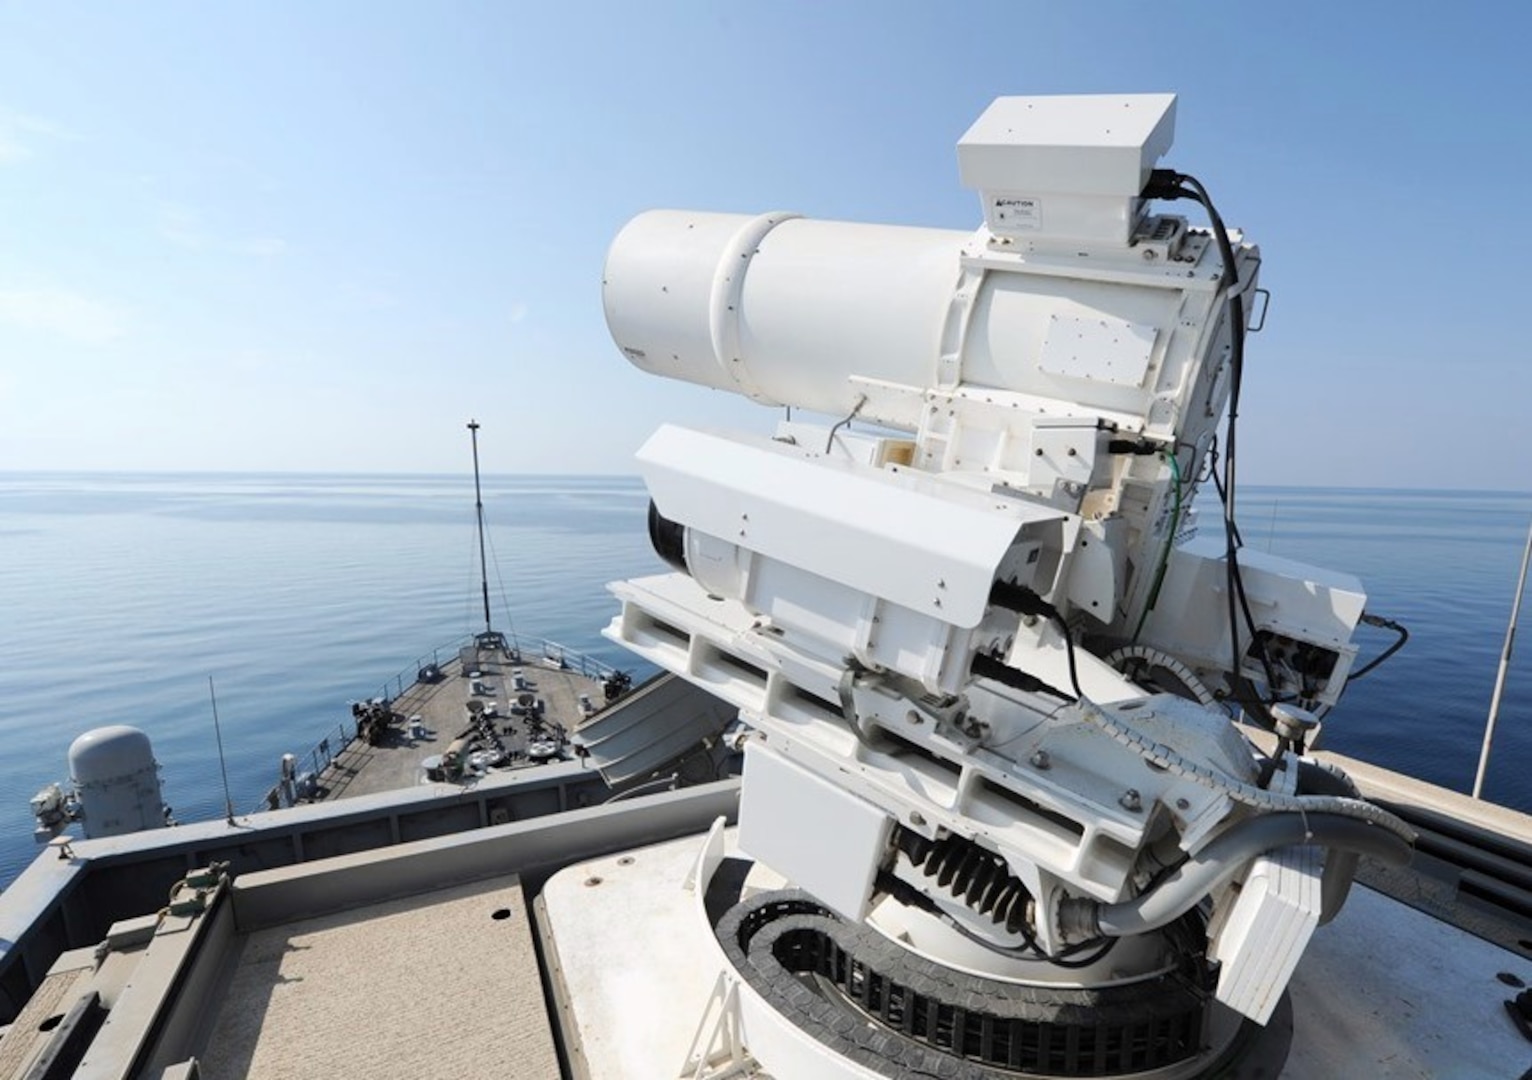 IMAGE: 141117-N-PO203-072 
ARABIAN GULF (Nov. 17, 2014) The Afloat Forward Staging Base (Interim) USS Ponce (ASB(I) 15) conducts an operational demonstration of the Office of Naval Research (ONR)-sponsored Laser Weapon System (LaWS) while deployed to the Arabian Gulf. (U.S. Navy photo by John F. Williams/Released)